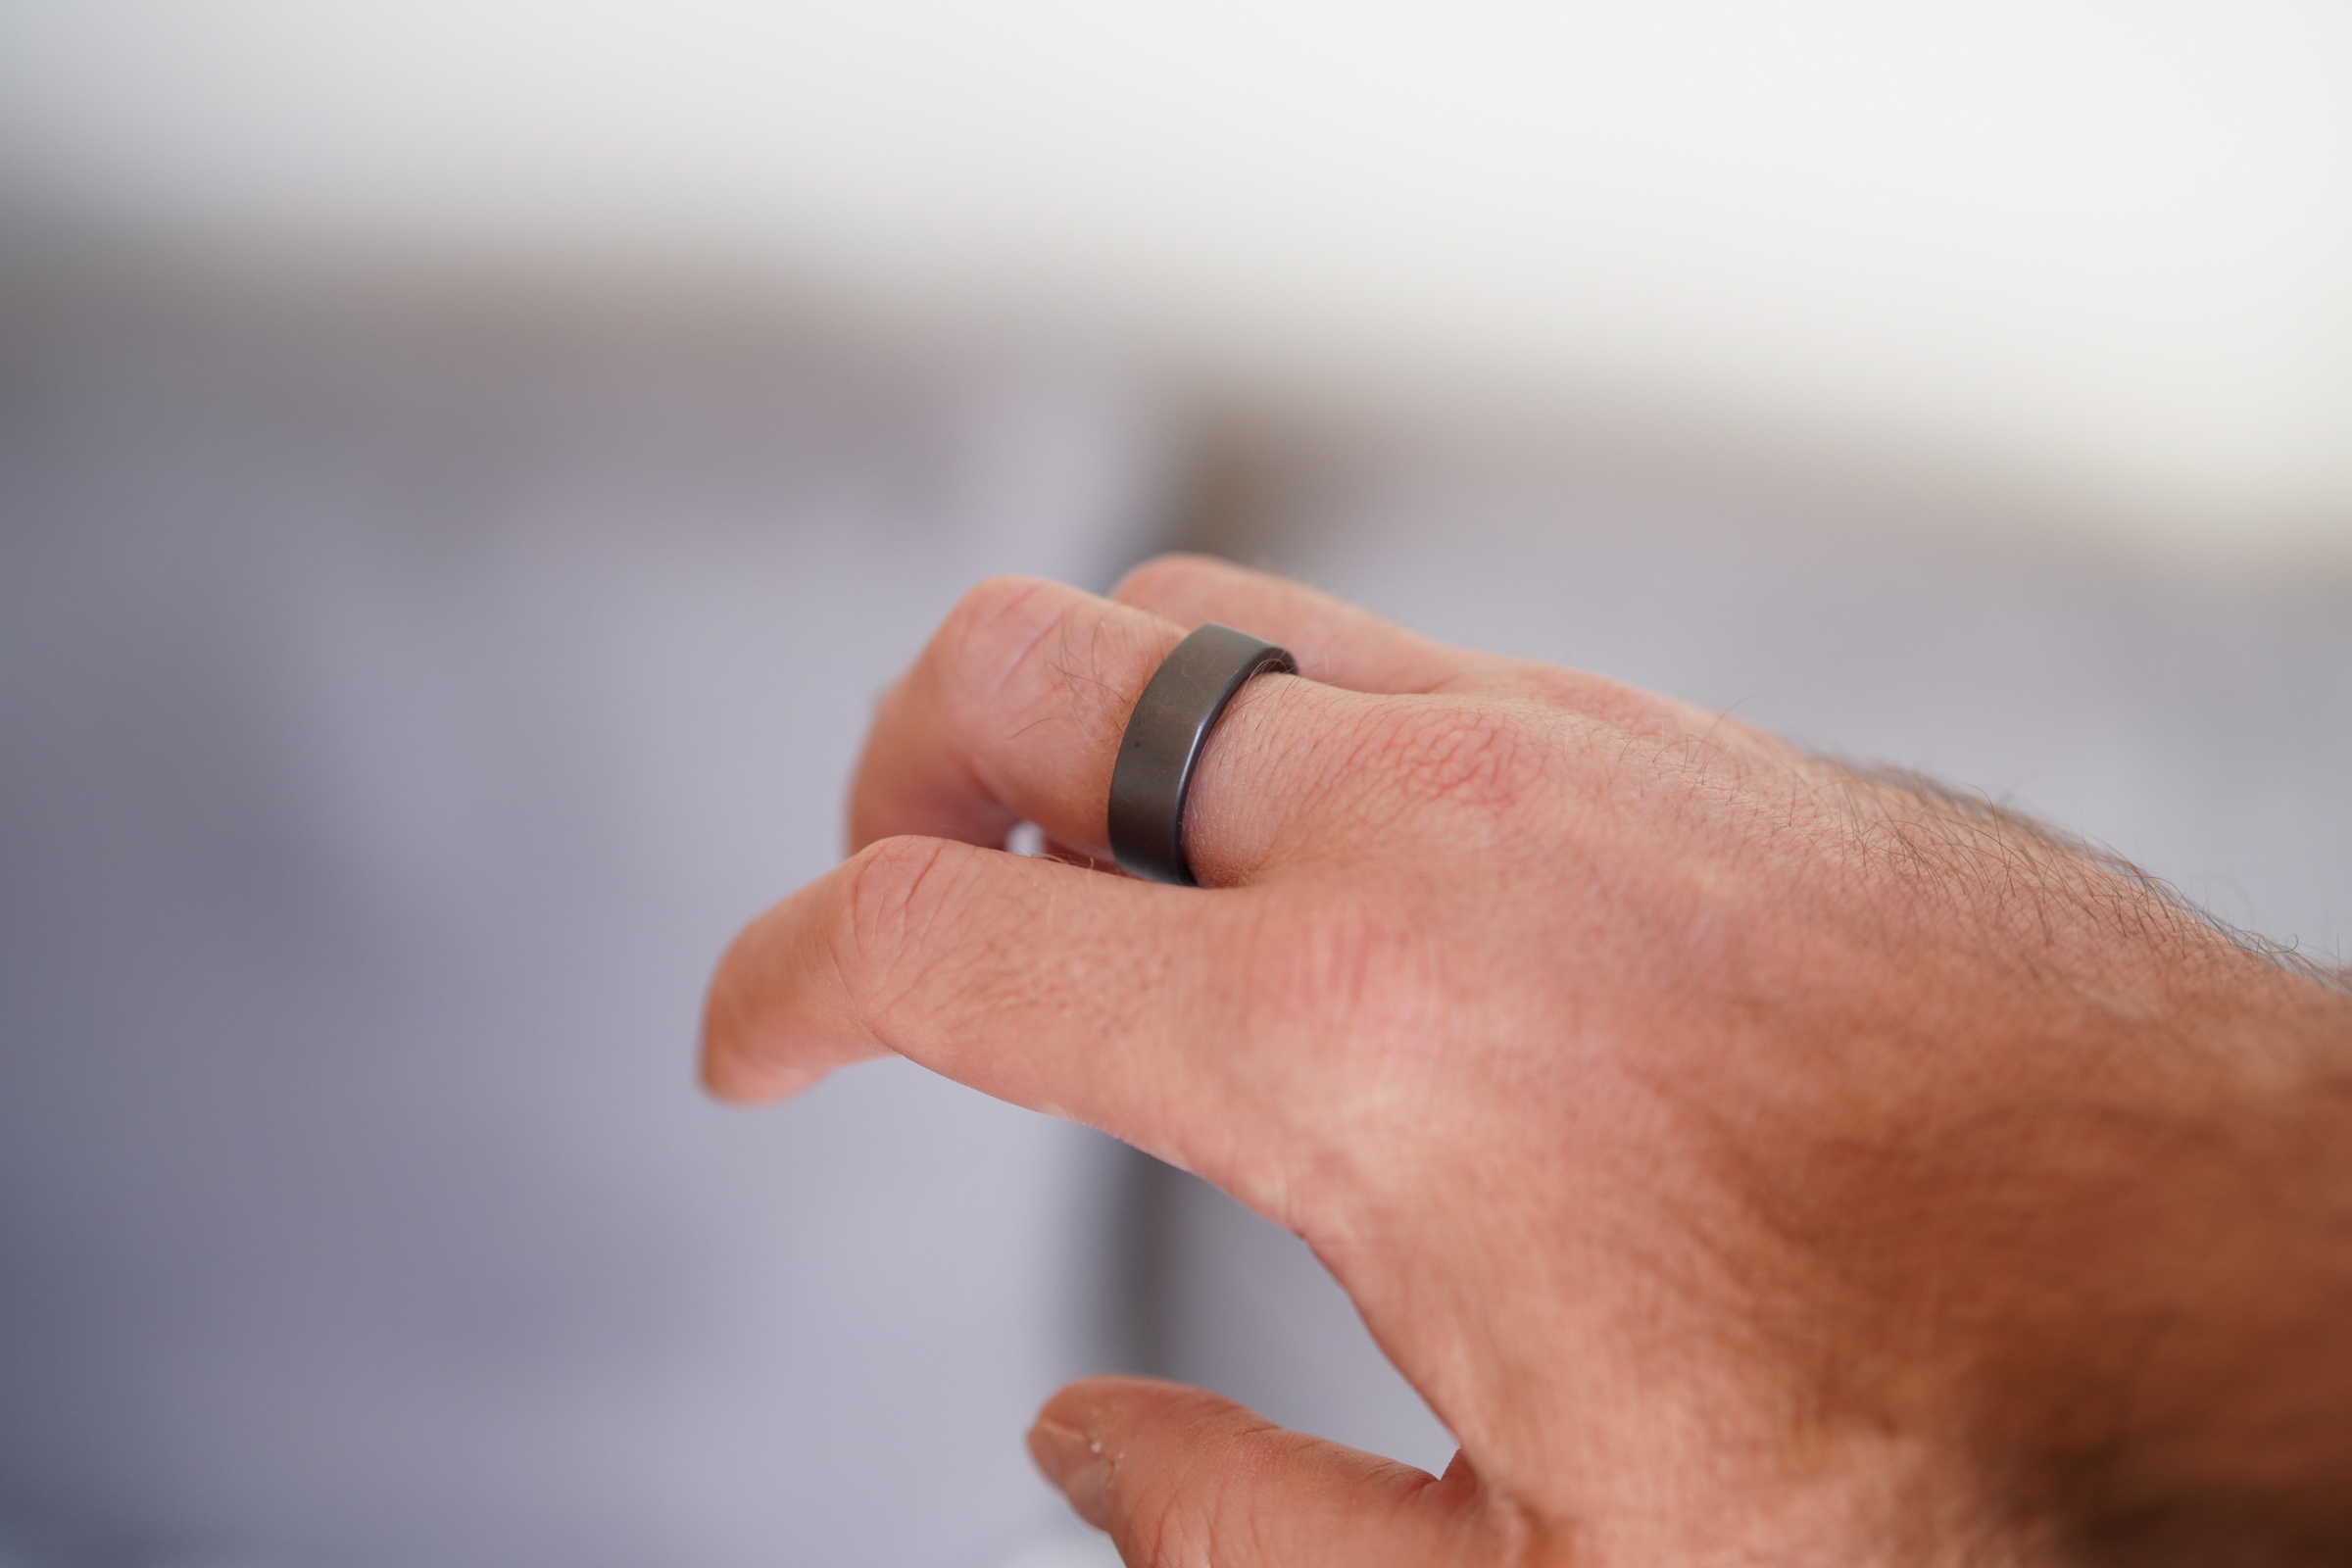 Oura Ring health and sleep tracker review